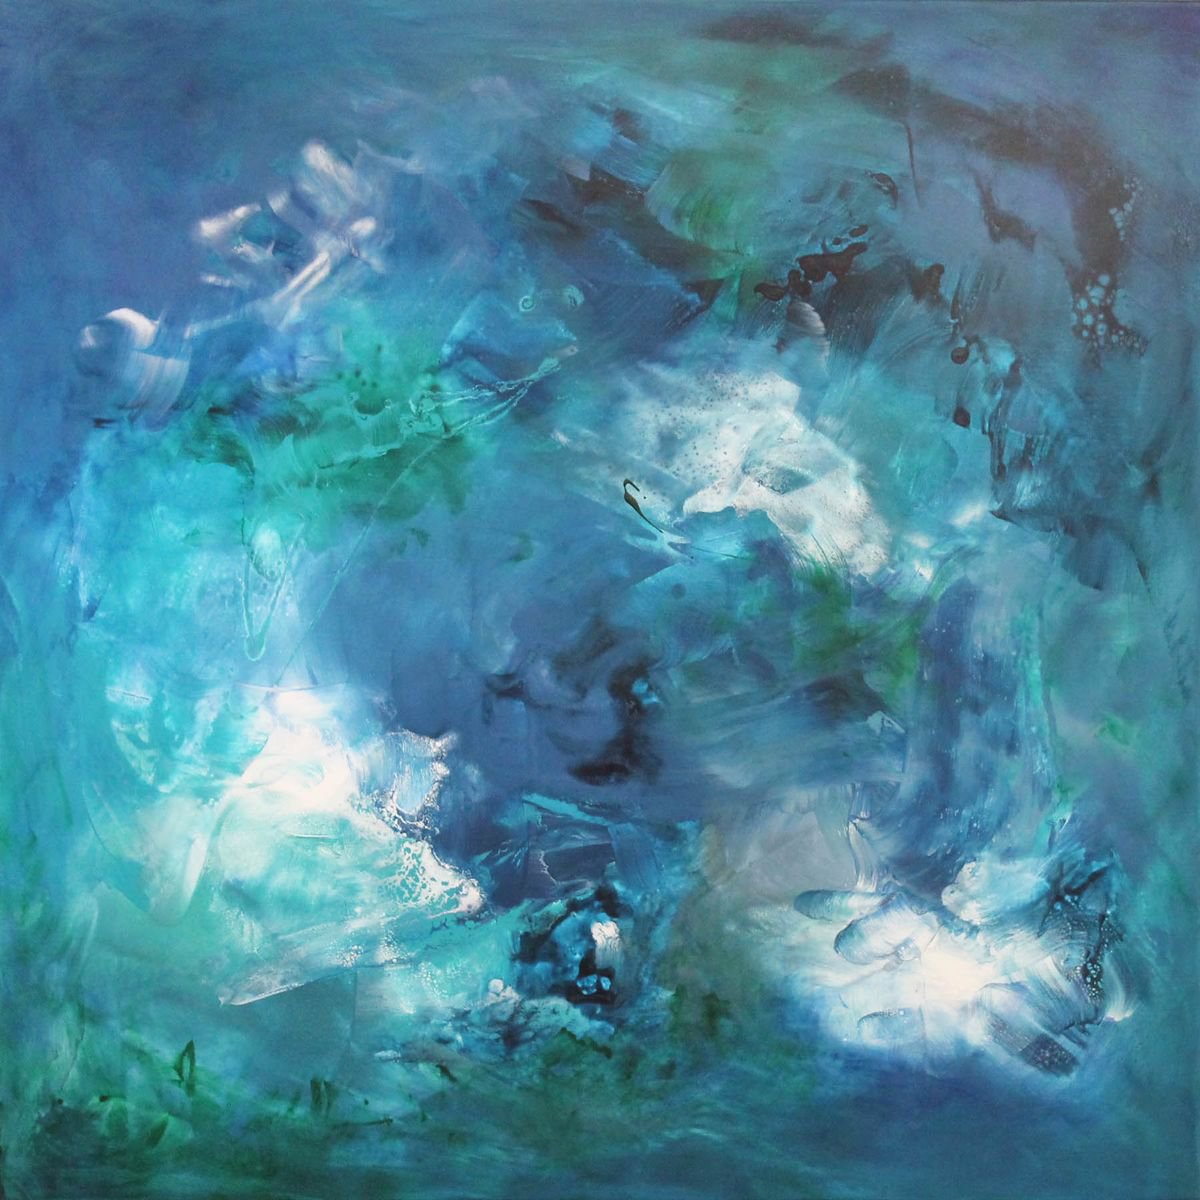 Our Memories/ teal abstract art by Paresh Nrshinga